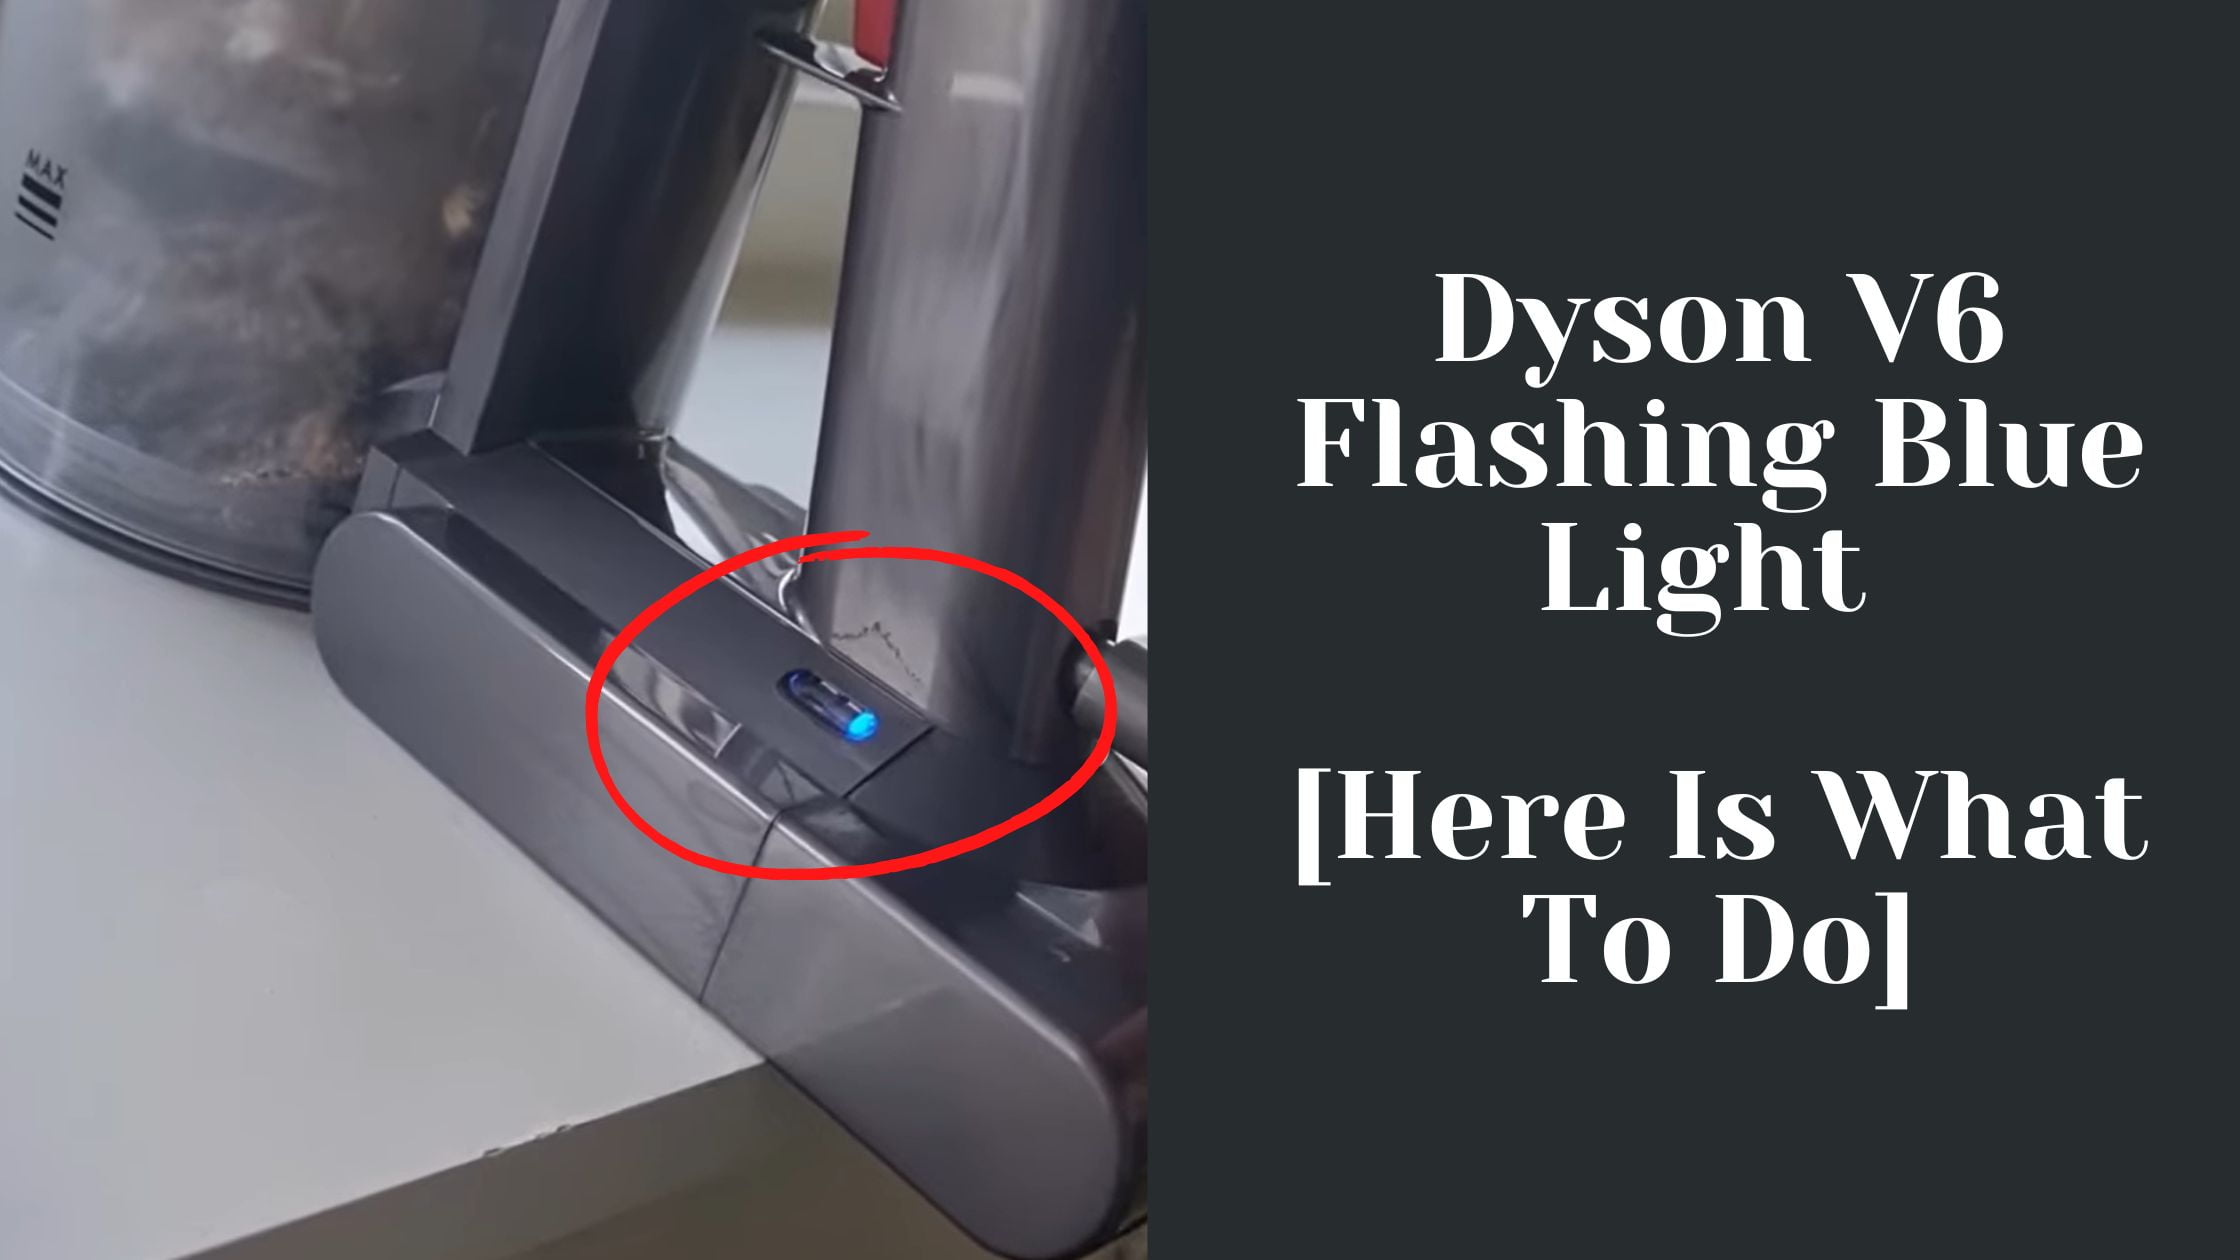 Dyson V6 Flashing Blue Light [Here Is To